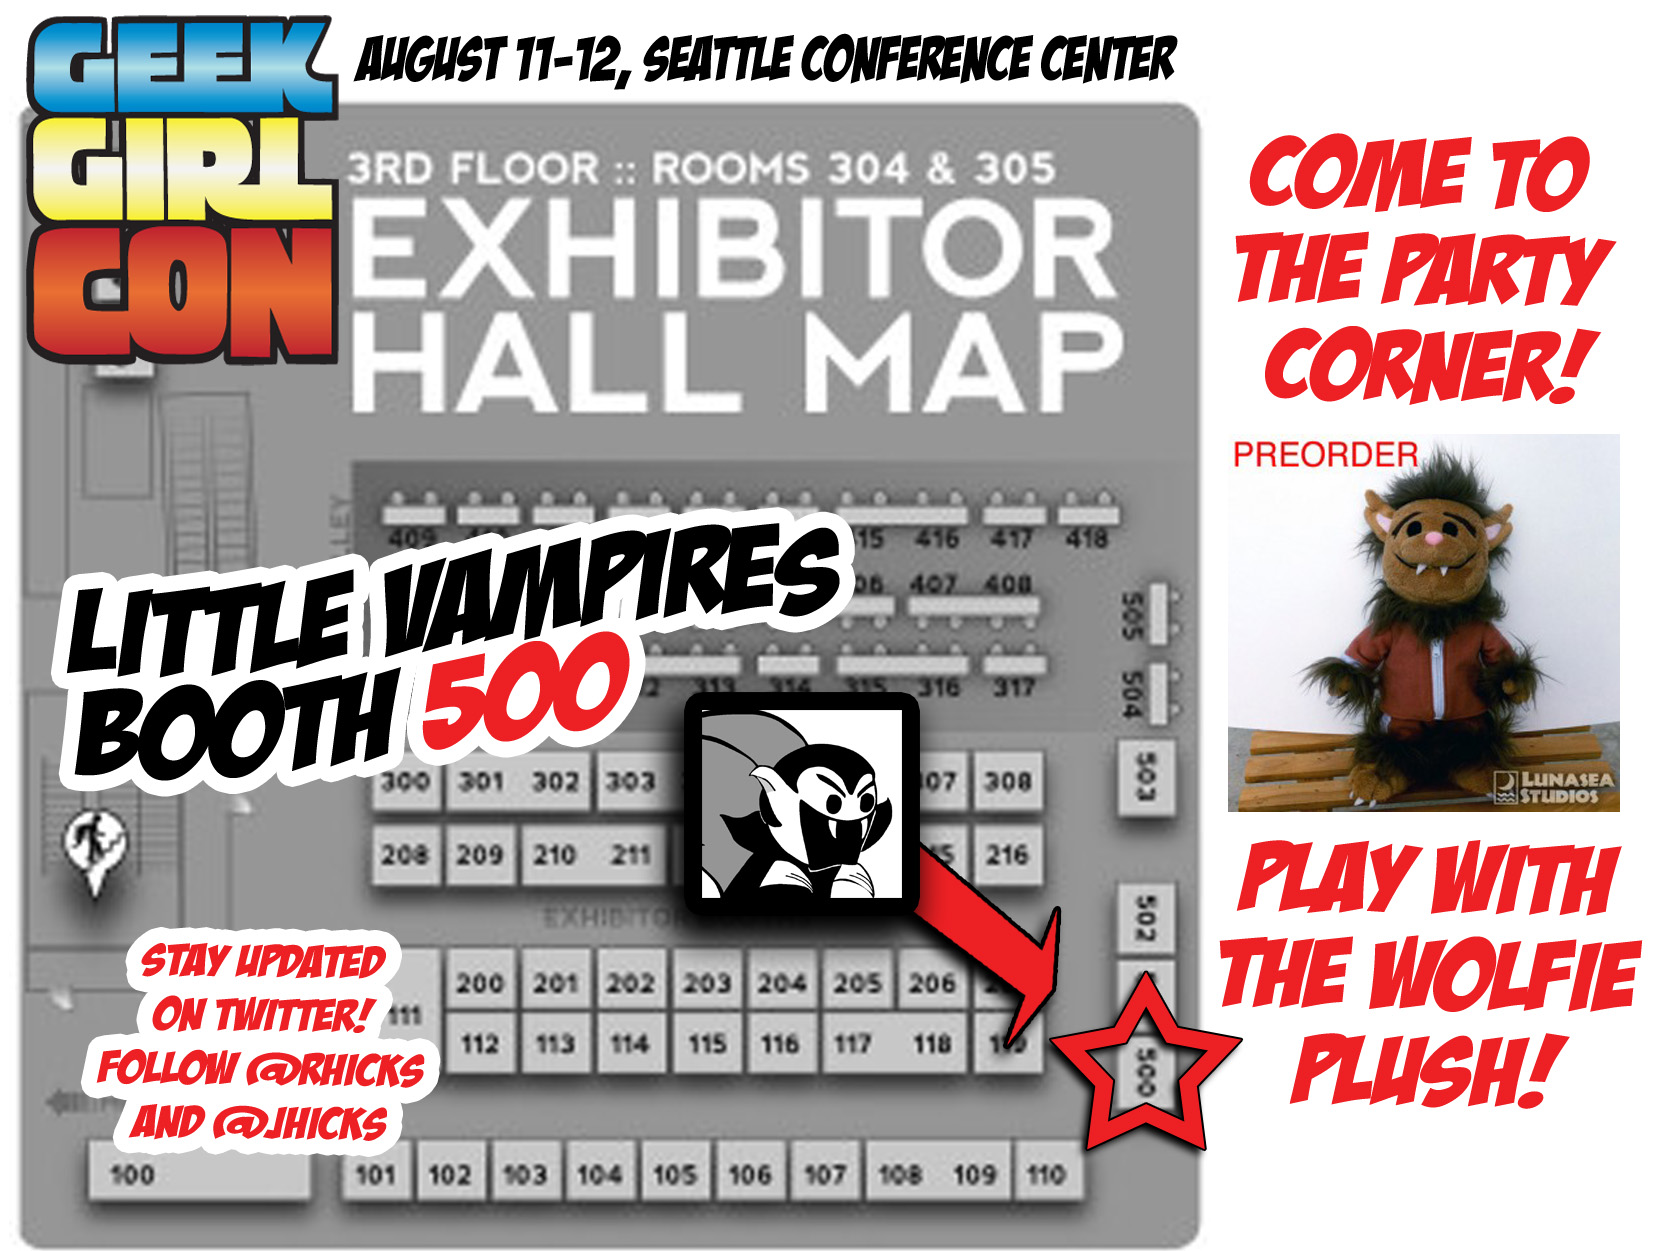 GeekGirlCon 2012 exhibitor floor map with the Little Vampires booth highlighted